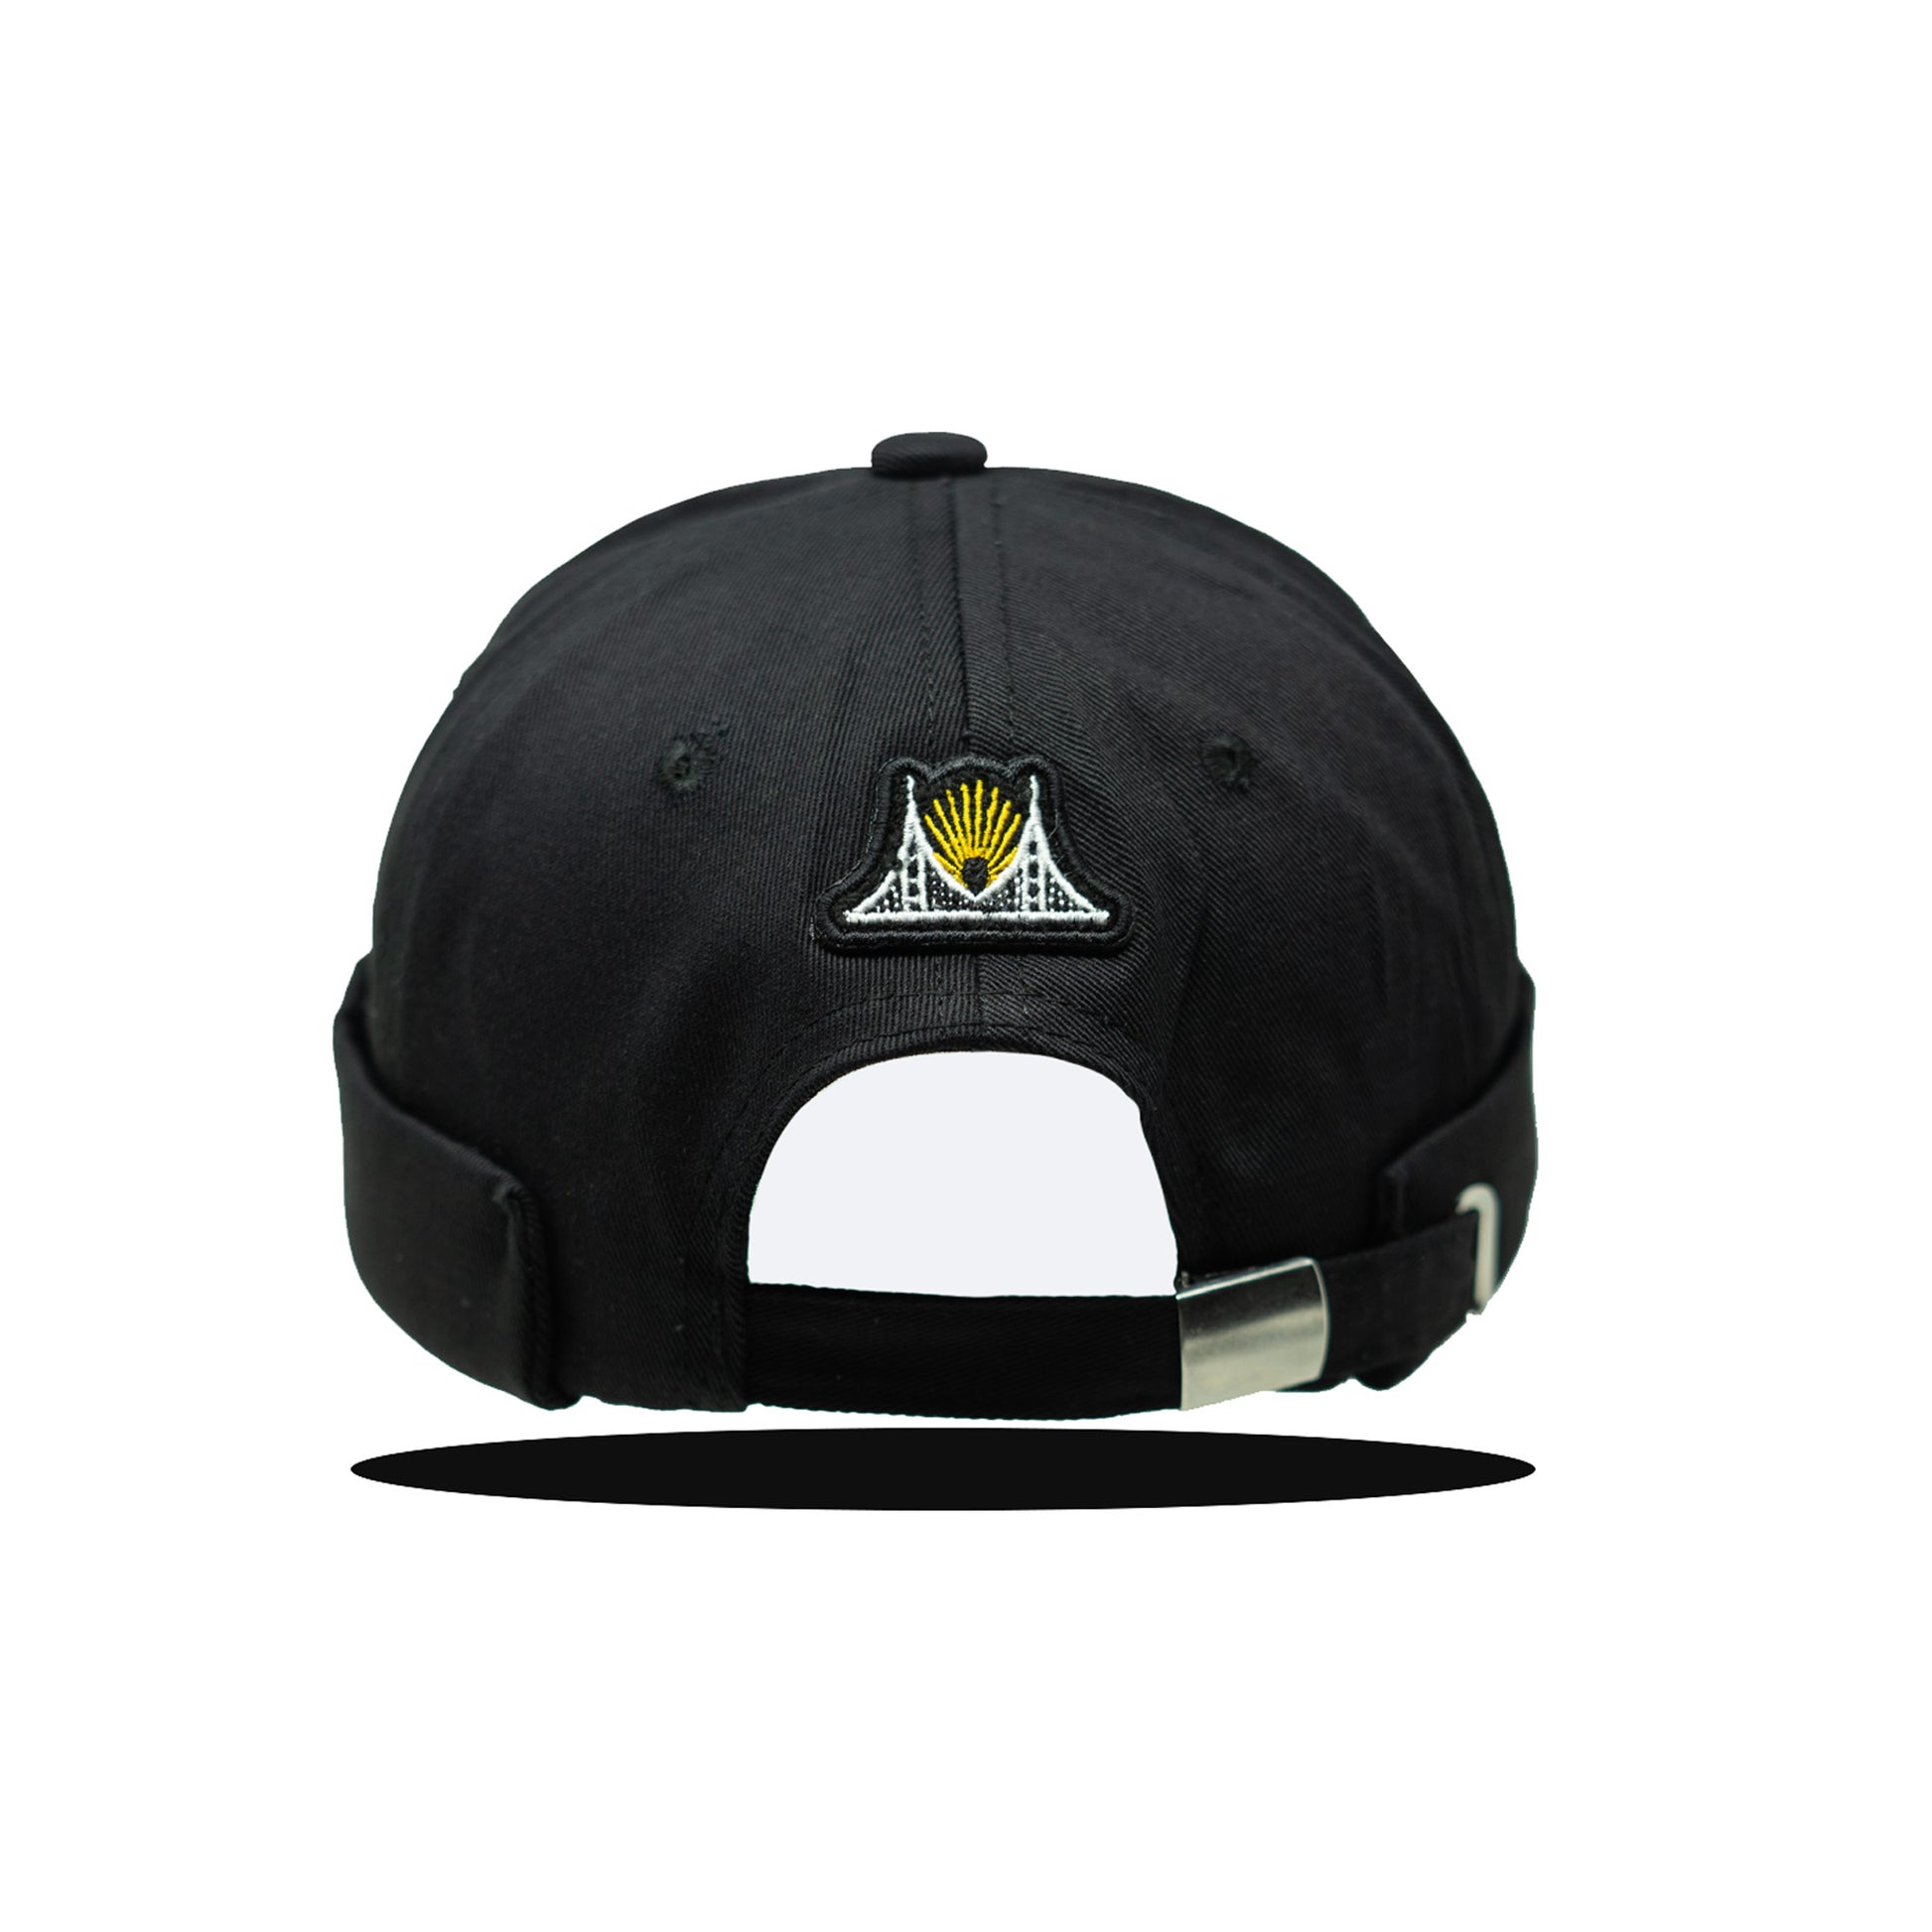 Black docker or bowl hat with the silhouette bay bridge logo on the back of the hat. 